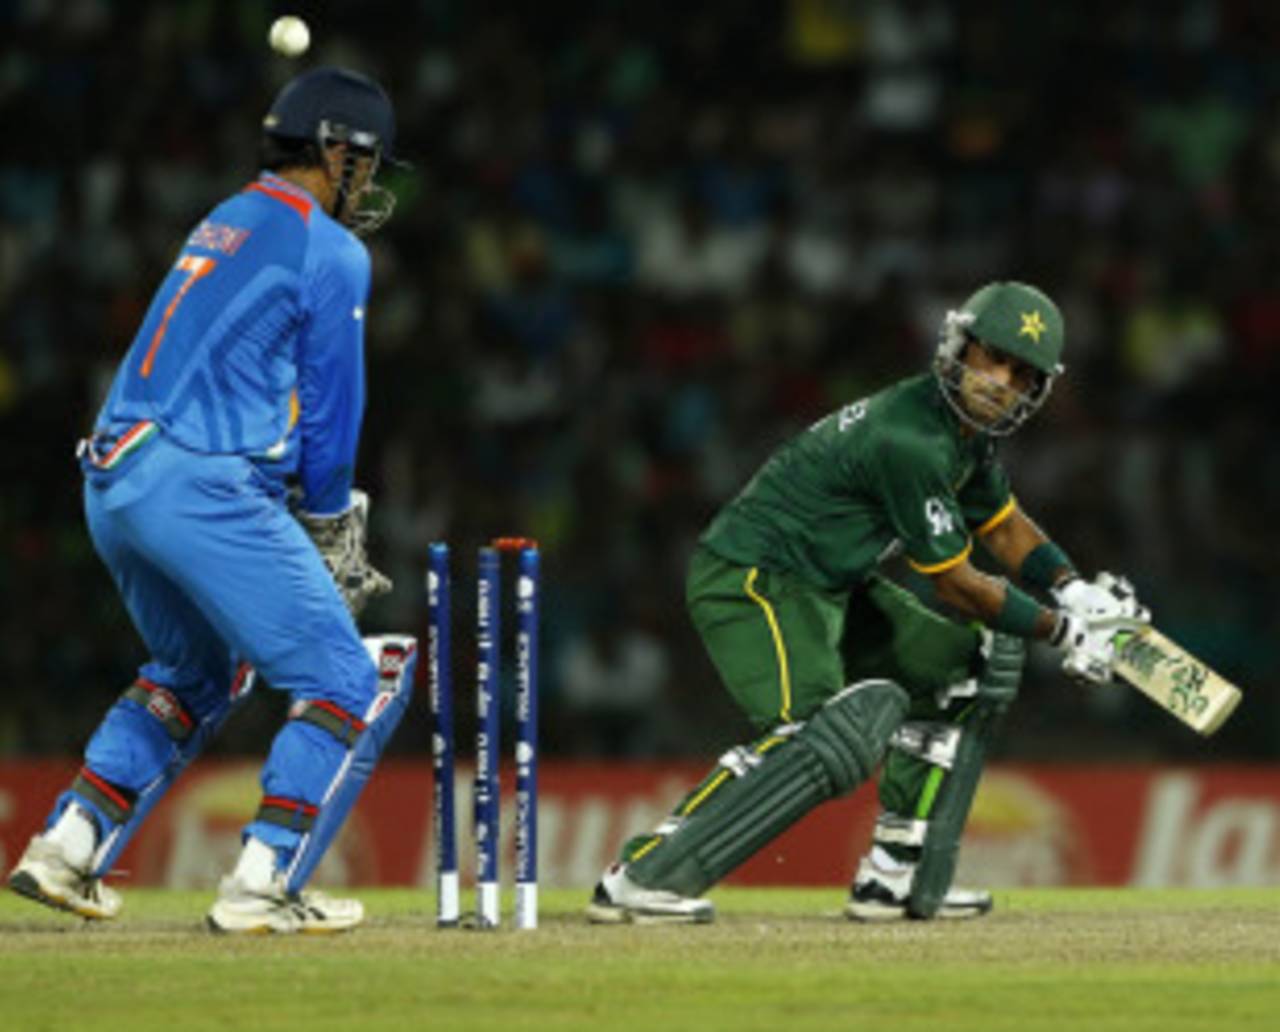 Defence rarely suits Pakistan's nature, yet Mohammad Hafeez took backward steps at critical moments in the match against India&nbsp;&nbsp;&bull;&nbsp;&nbsp;Associated Press